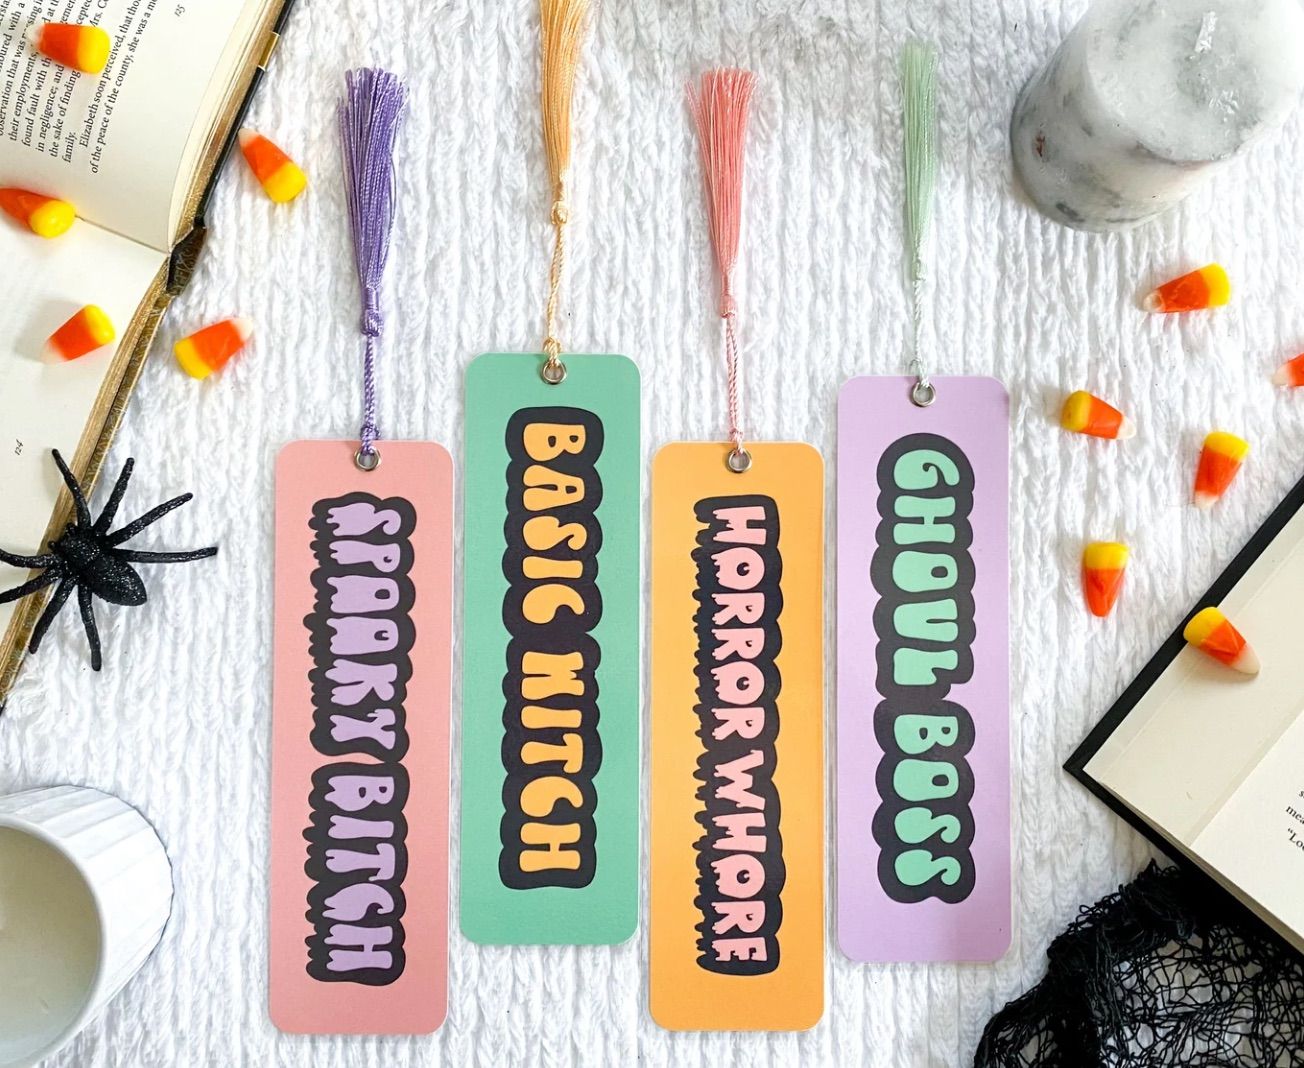 Image of four bookmarks in pastel colors. They read "spooky bitch," "Basic witch," "horror whore," and "ghoul boss."